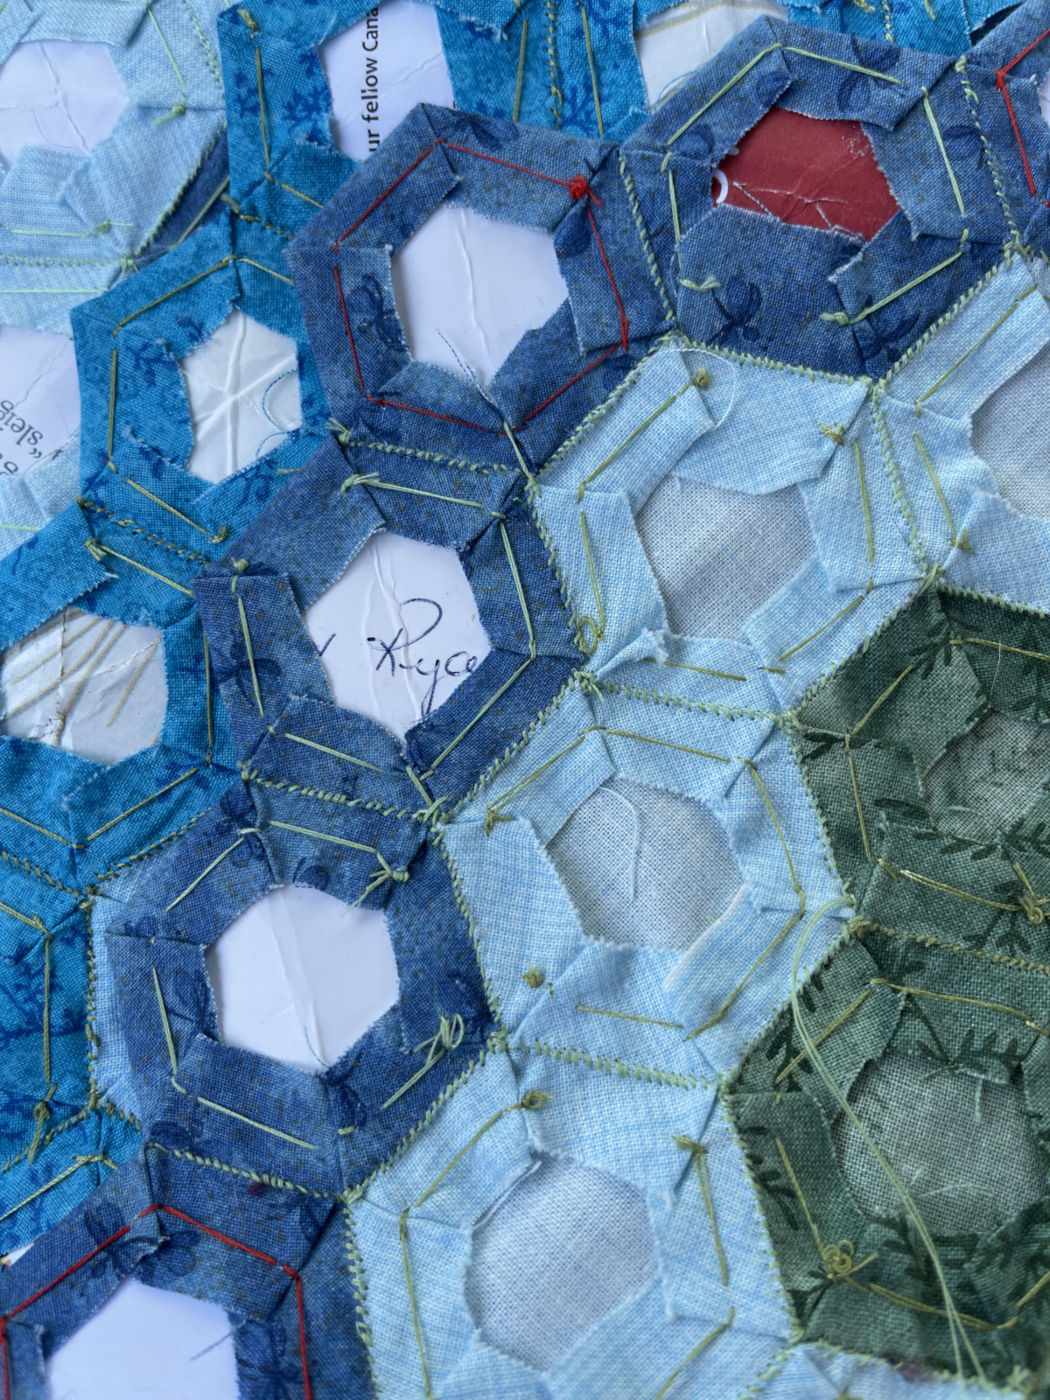 The backside of a quilt in progress shows hexagons sewn around paper. The hexagons are in various shades of blue and a bit of green.